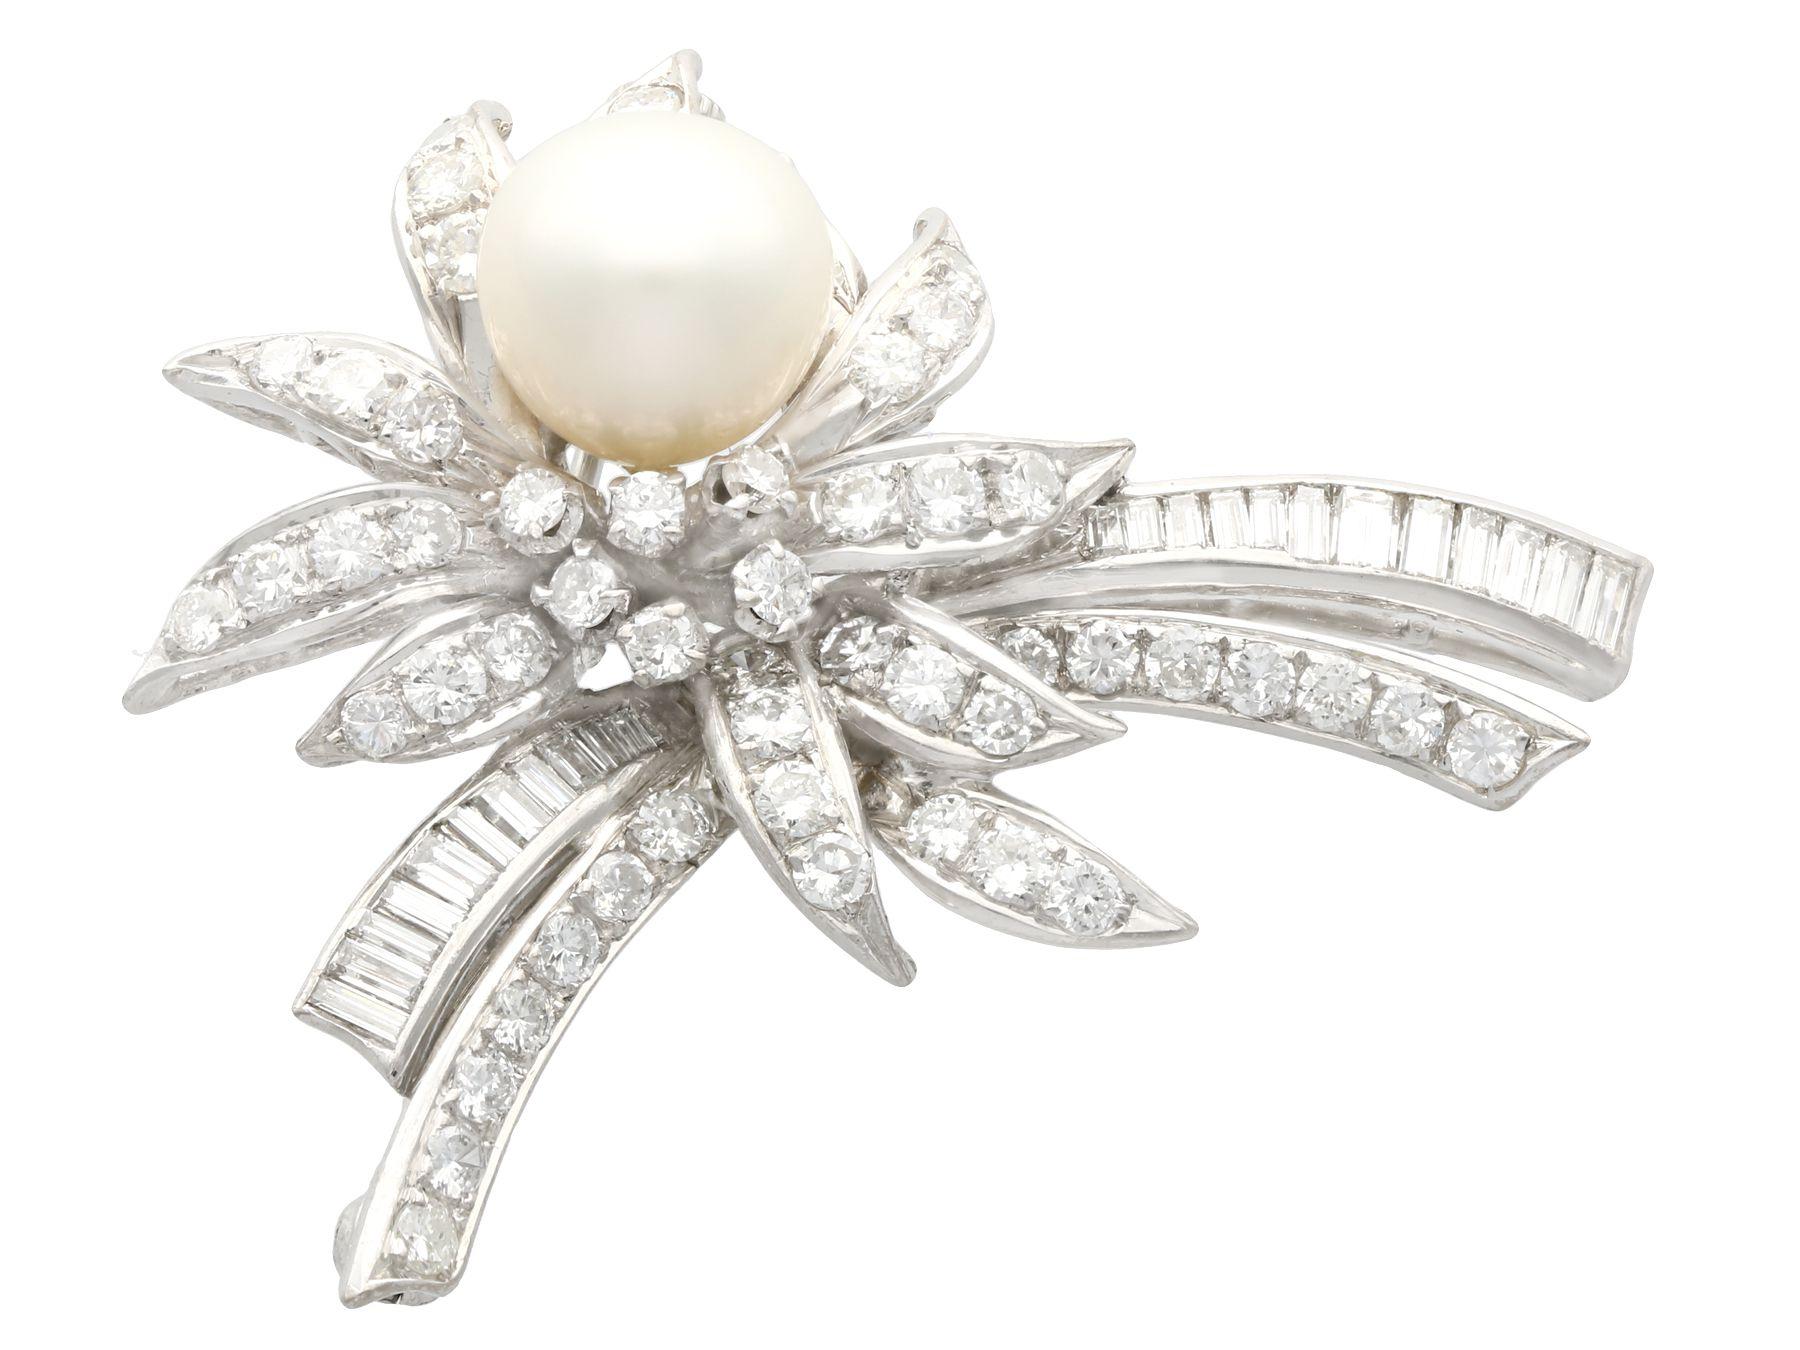 An impressive vintage 1940s 3.92 carat diamond and cultured pearl brooch crafted in 12 karat white gold; part of our diverse vintage jewelry and estate jewelry collections.

This stunning, fine and impressive vintage brooch has been crafted in 12k